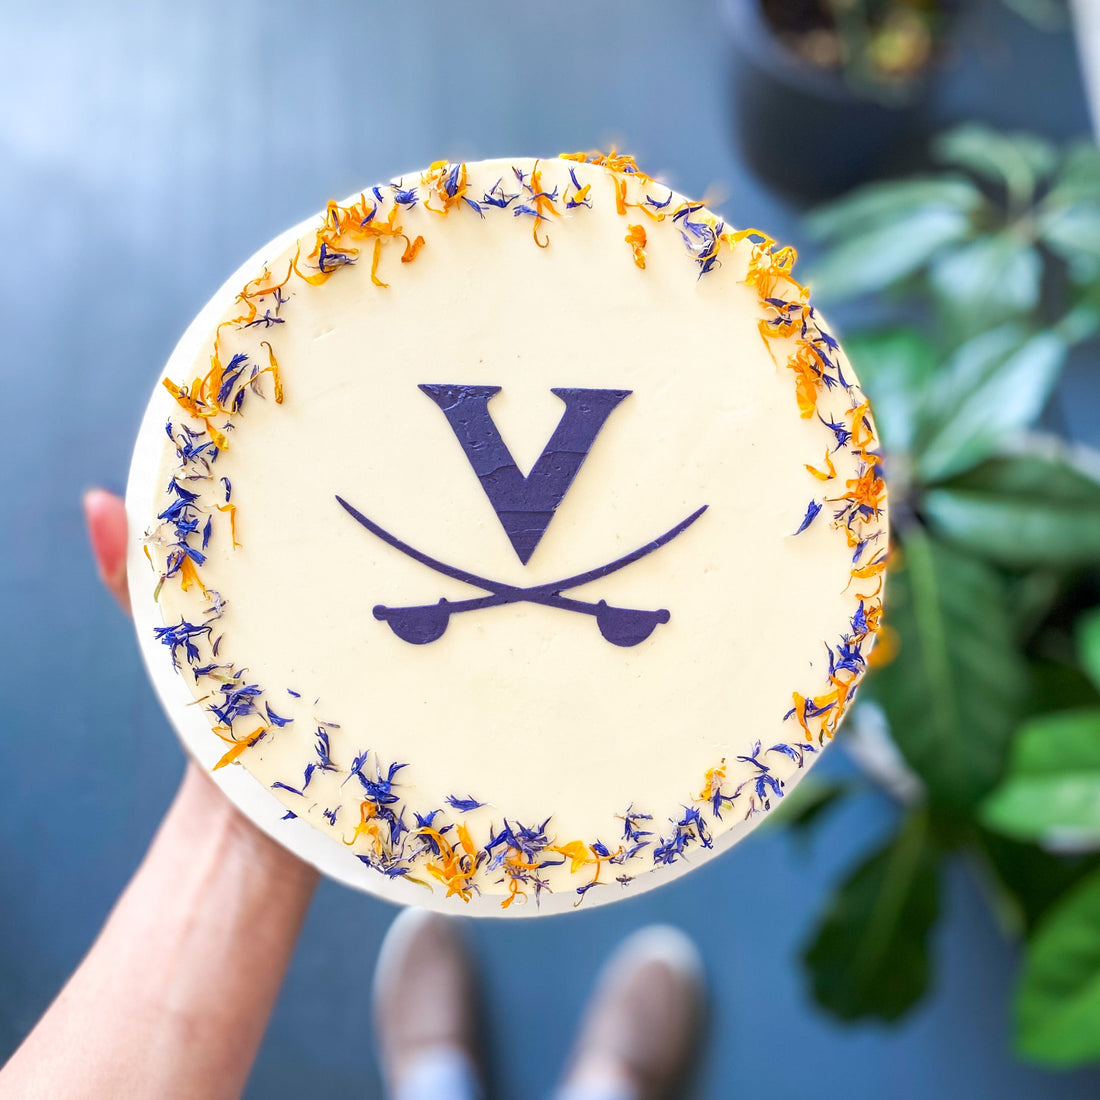 UVA graduation cake by Cake Bloom featuring a stenciled blue "V" and cavalier blue and orange edible flowers. Available for pick-up and local delivery in Charlottesville, Virginia.